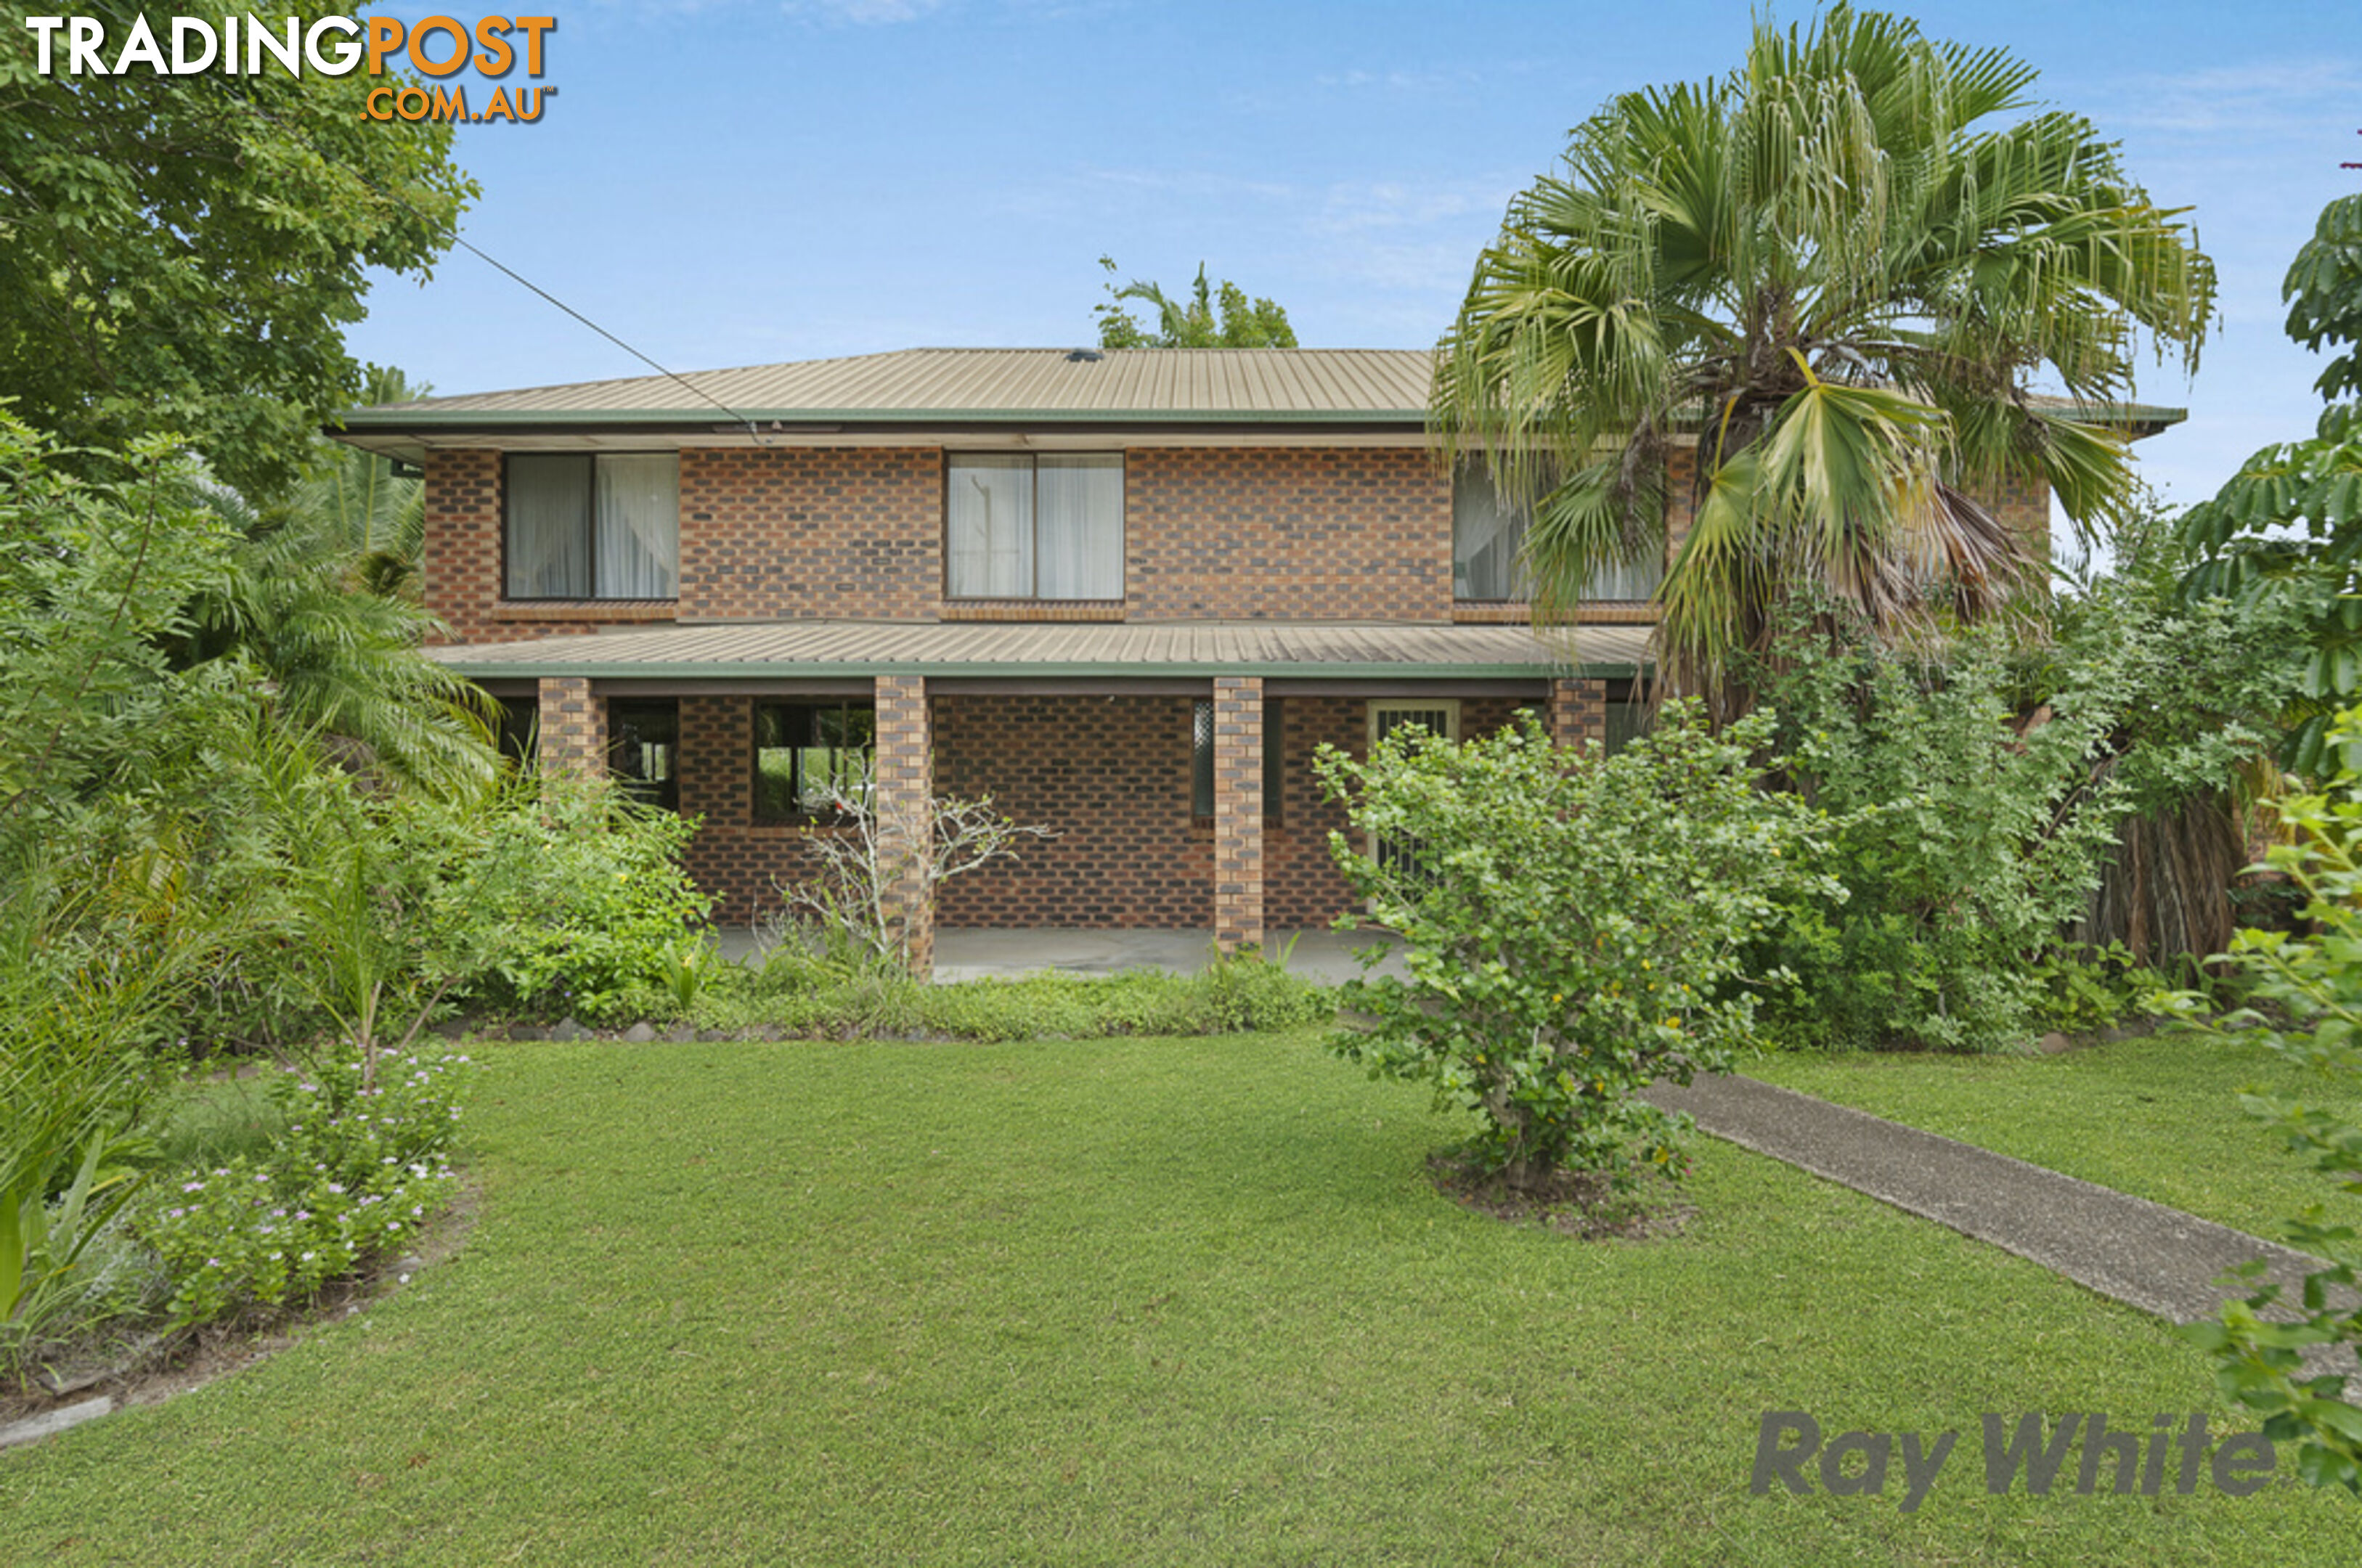 170-172 Tygum Rd WATERFORD WEST QLD 4133